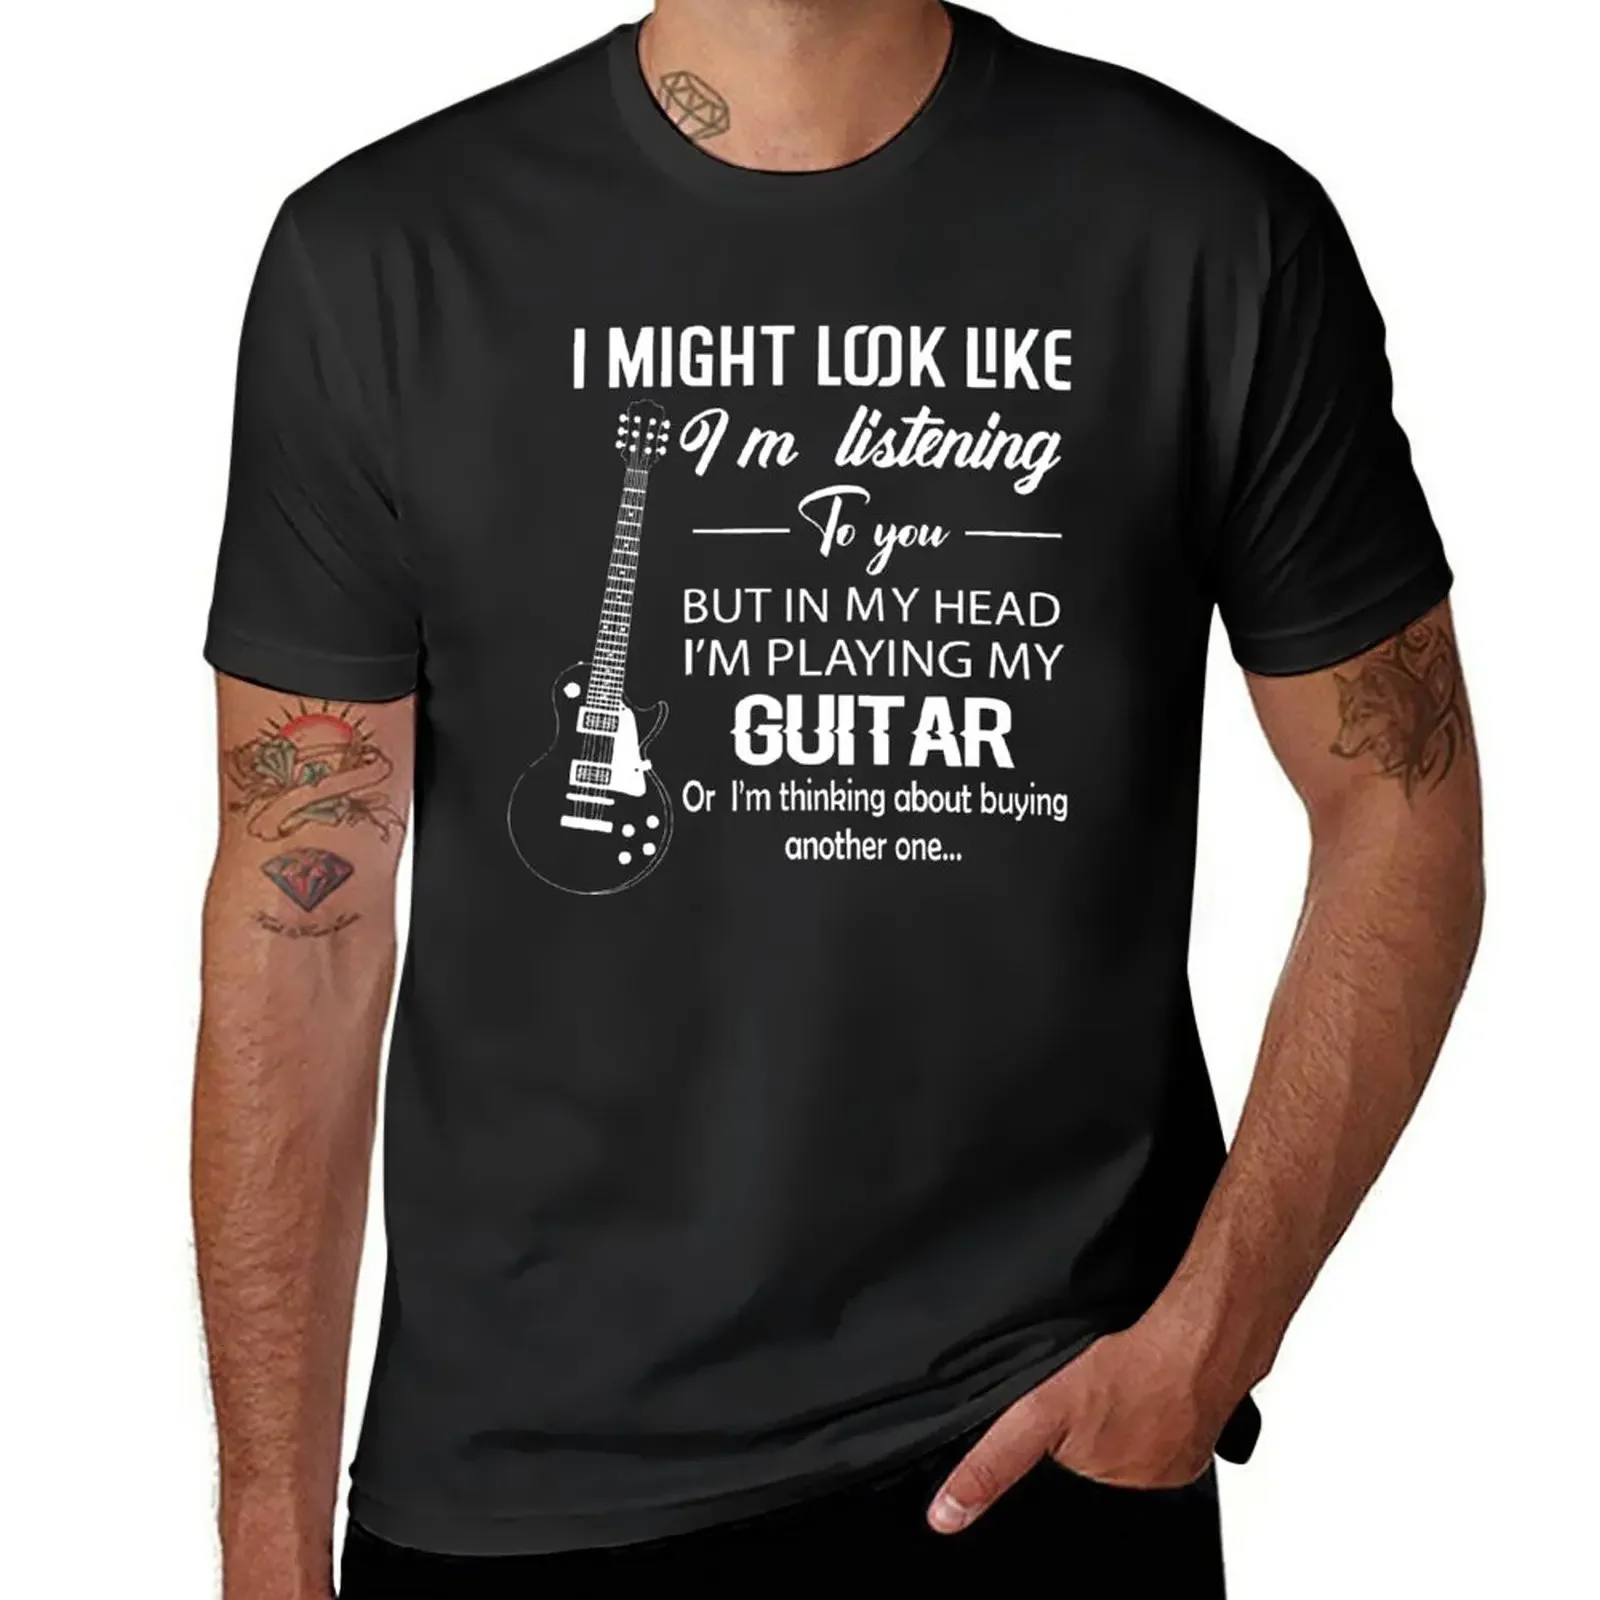 

I might look like I'm listening to you, but in my head I'm playing my Guitar | T-Shirt tops quick-drying mens plain t shirts